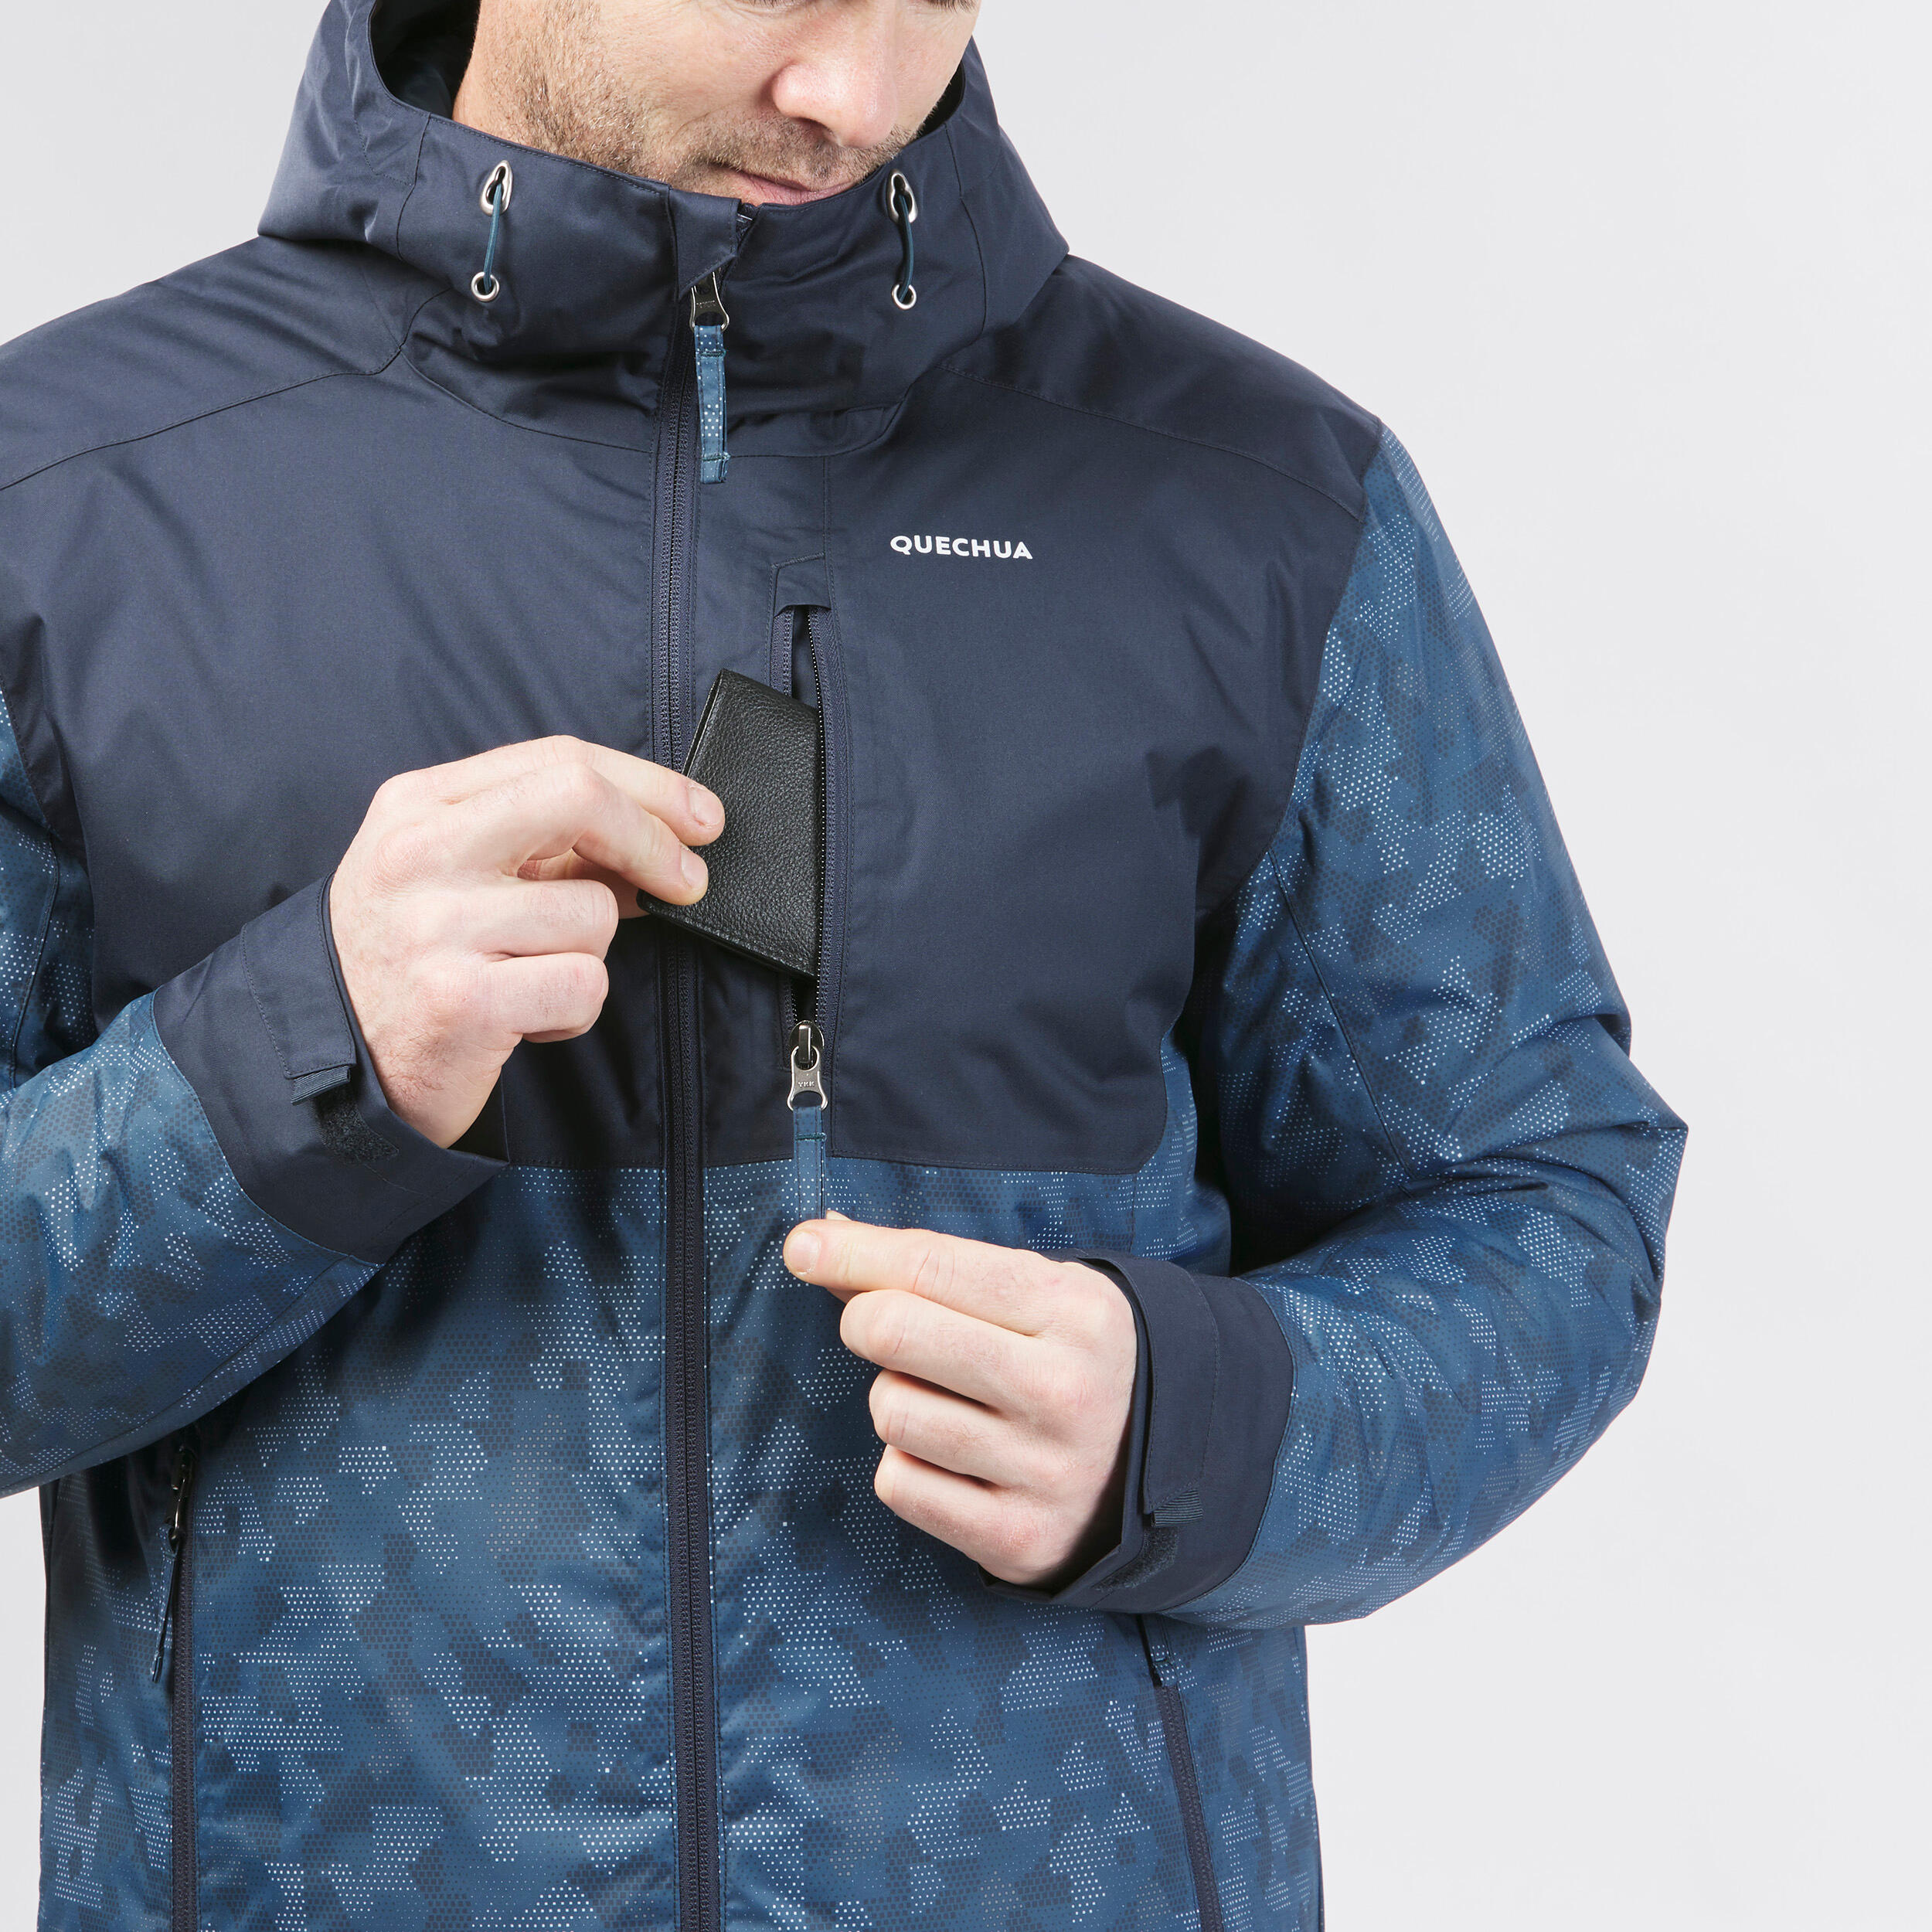 How to Look After and Repair a Waterproof Jacket | Decathlon